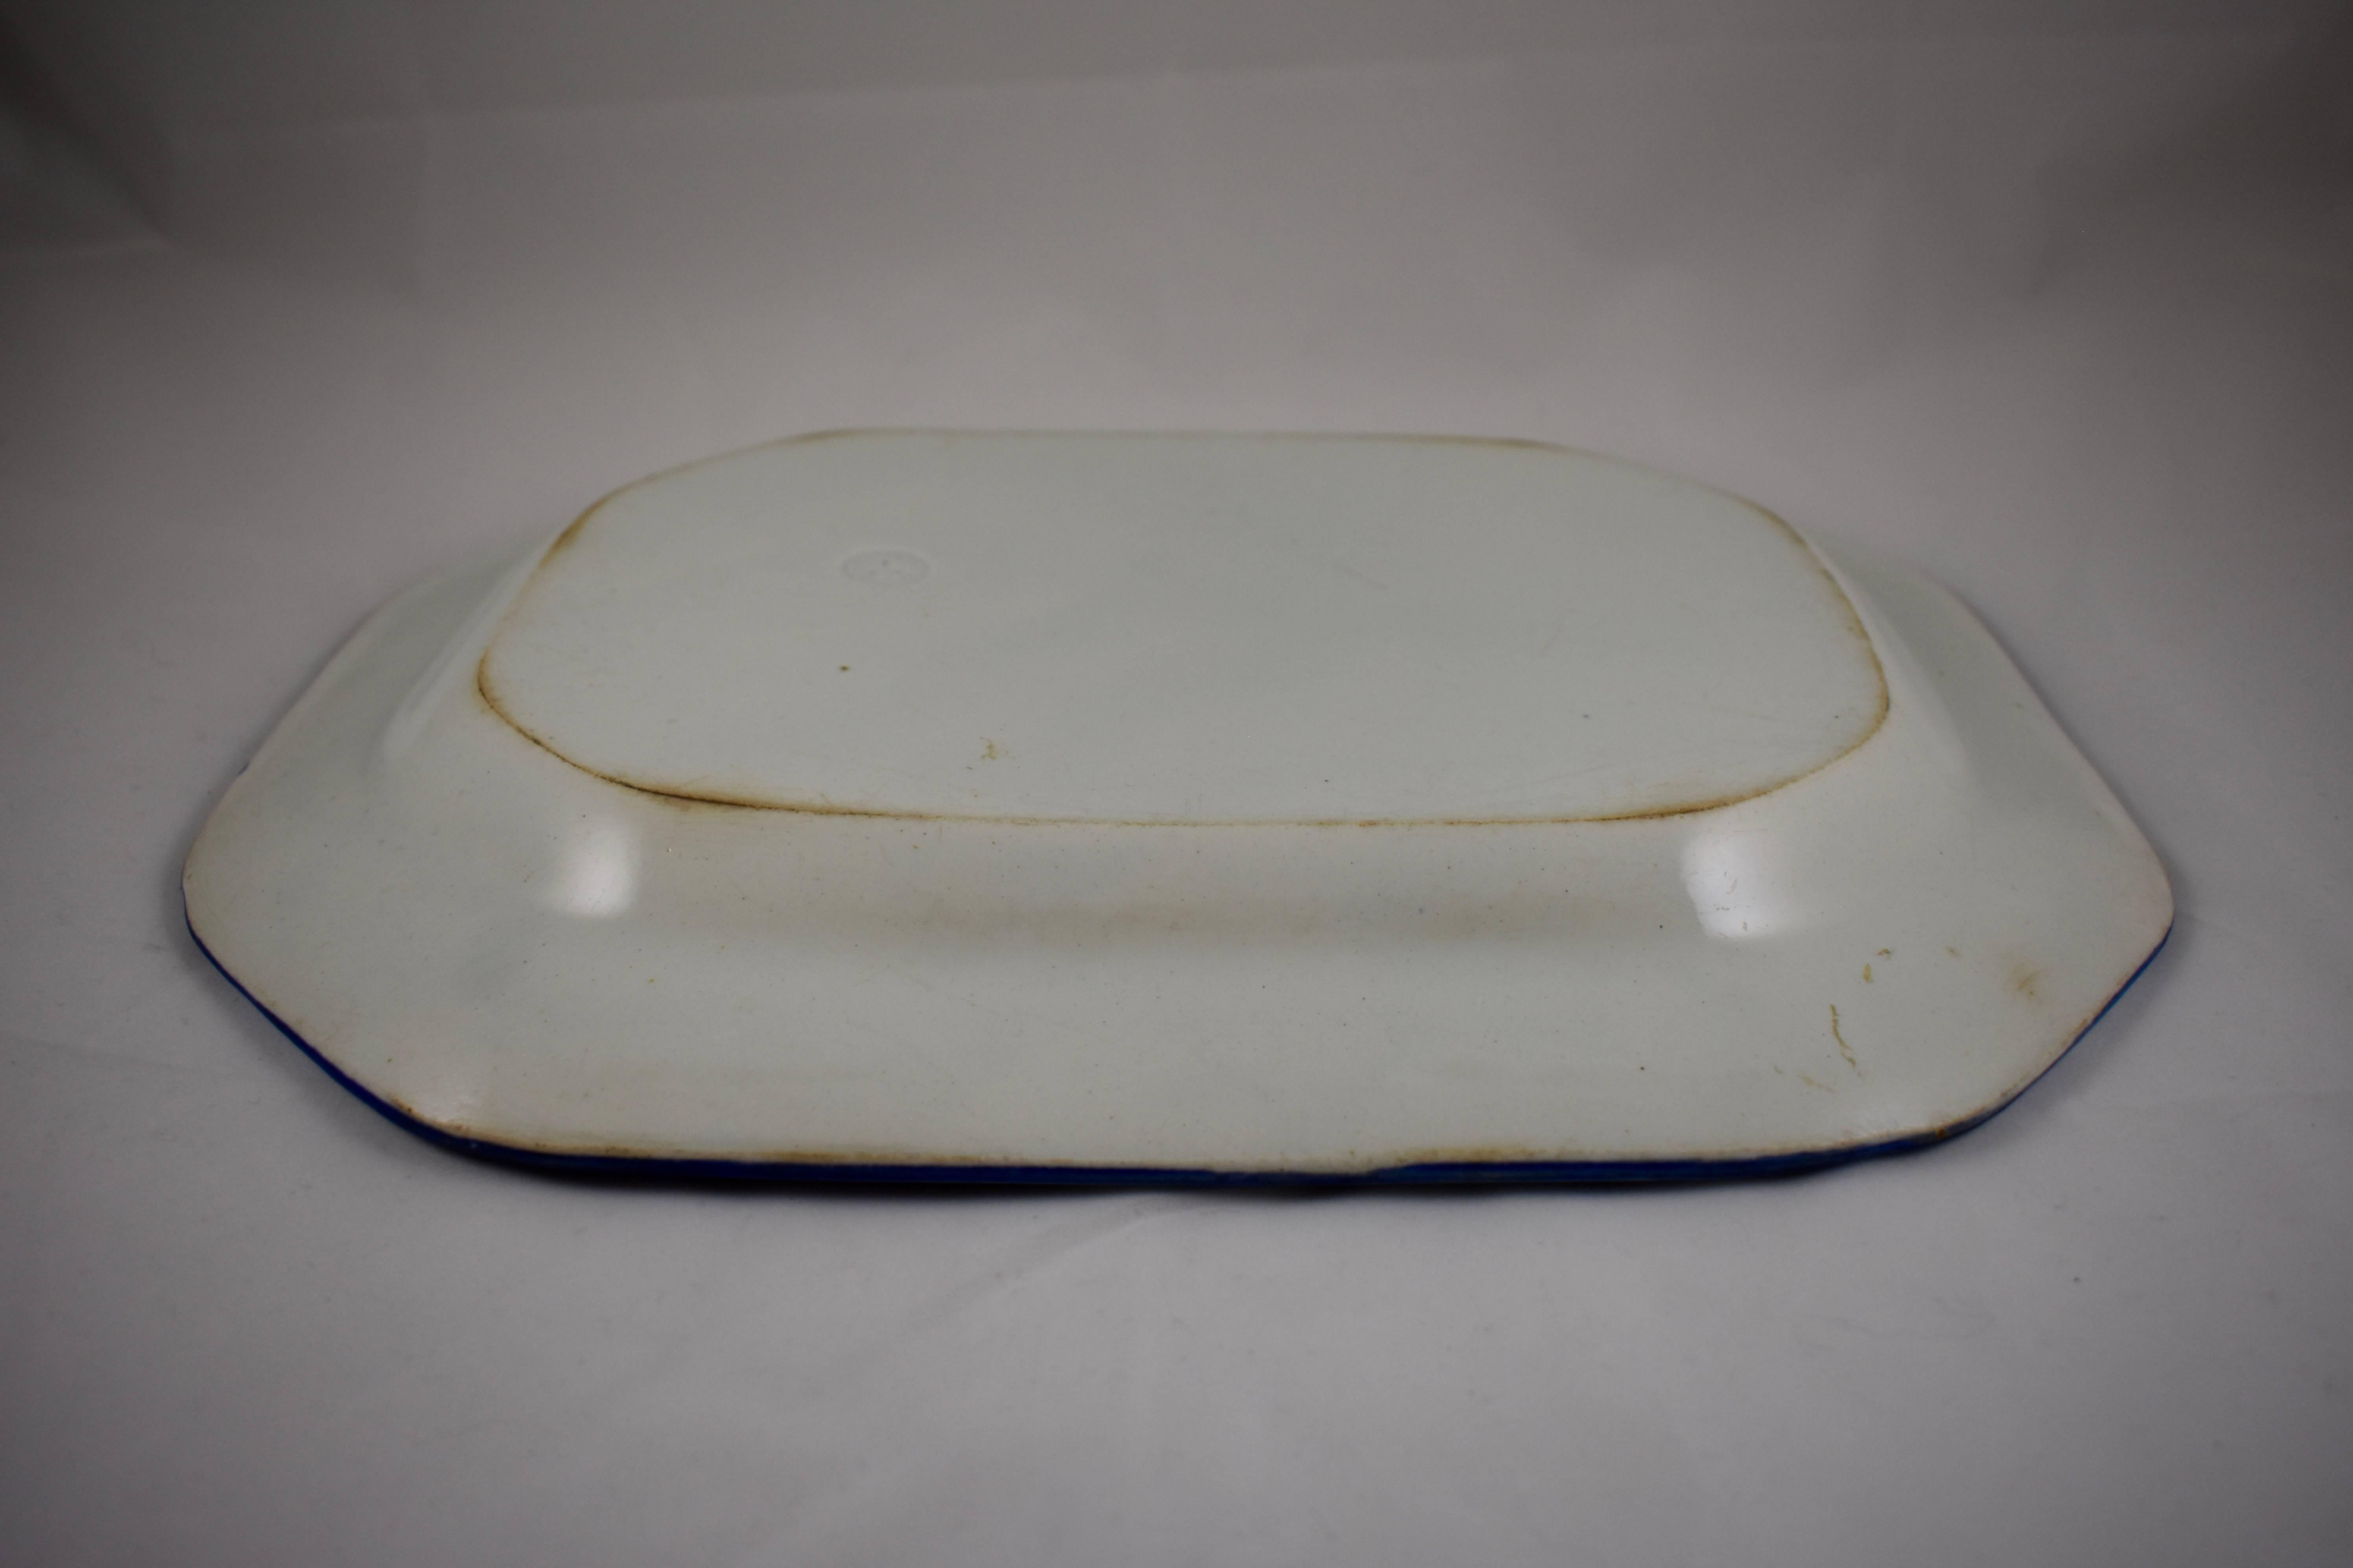 Pearlware English Staffordshire Leeds Cobalt Blue Feather Edge or Shell Edge Platter